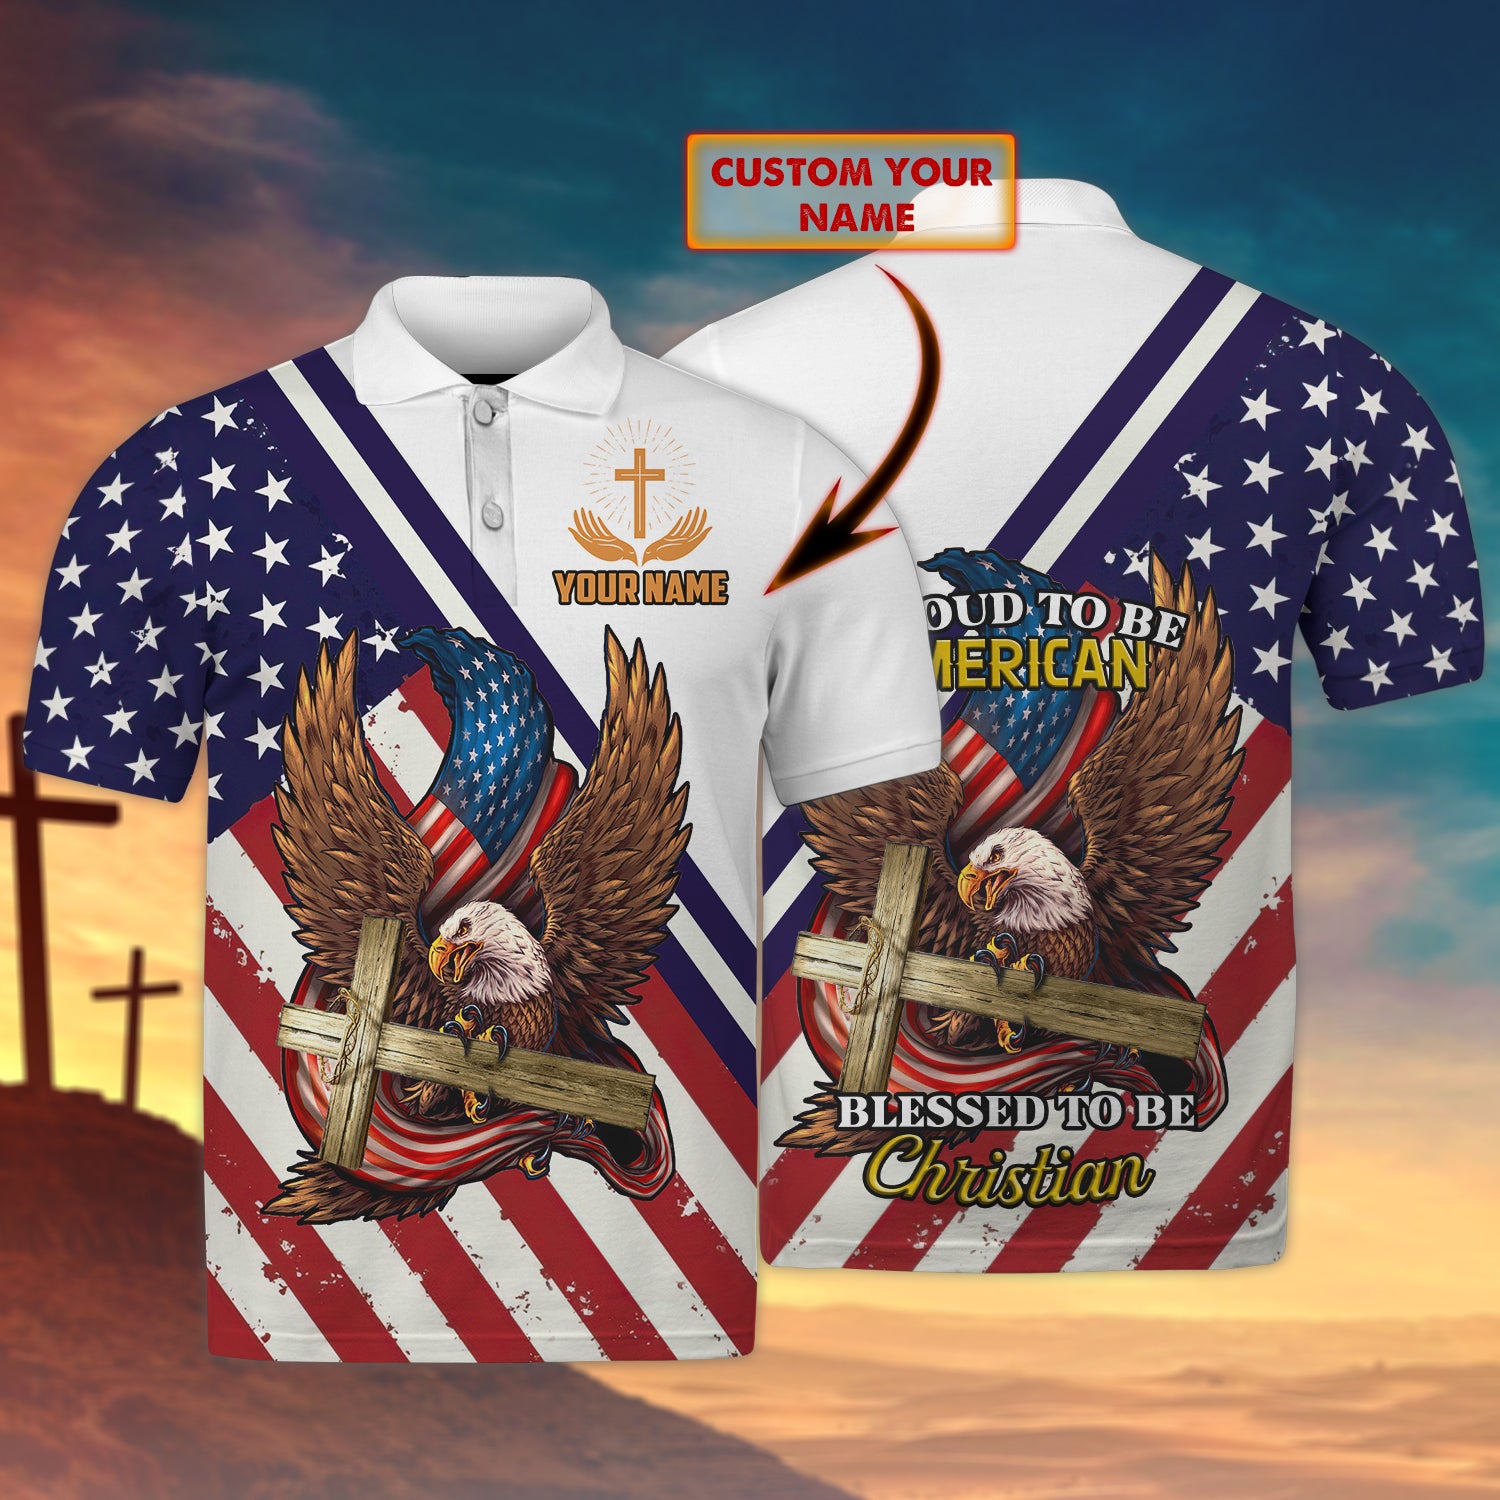 Customized Polo shirt-Eagle-Proud To Be American-Blessed To Be Christian-HTV